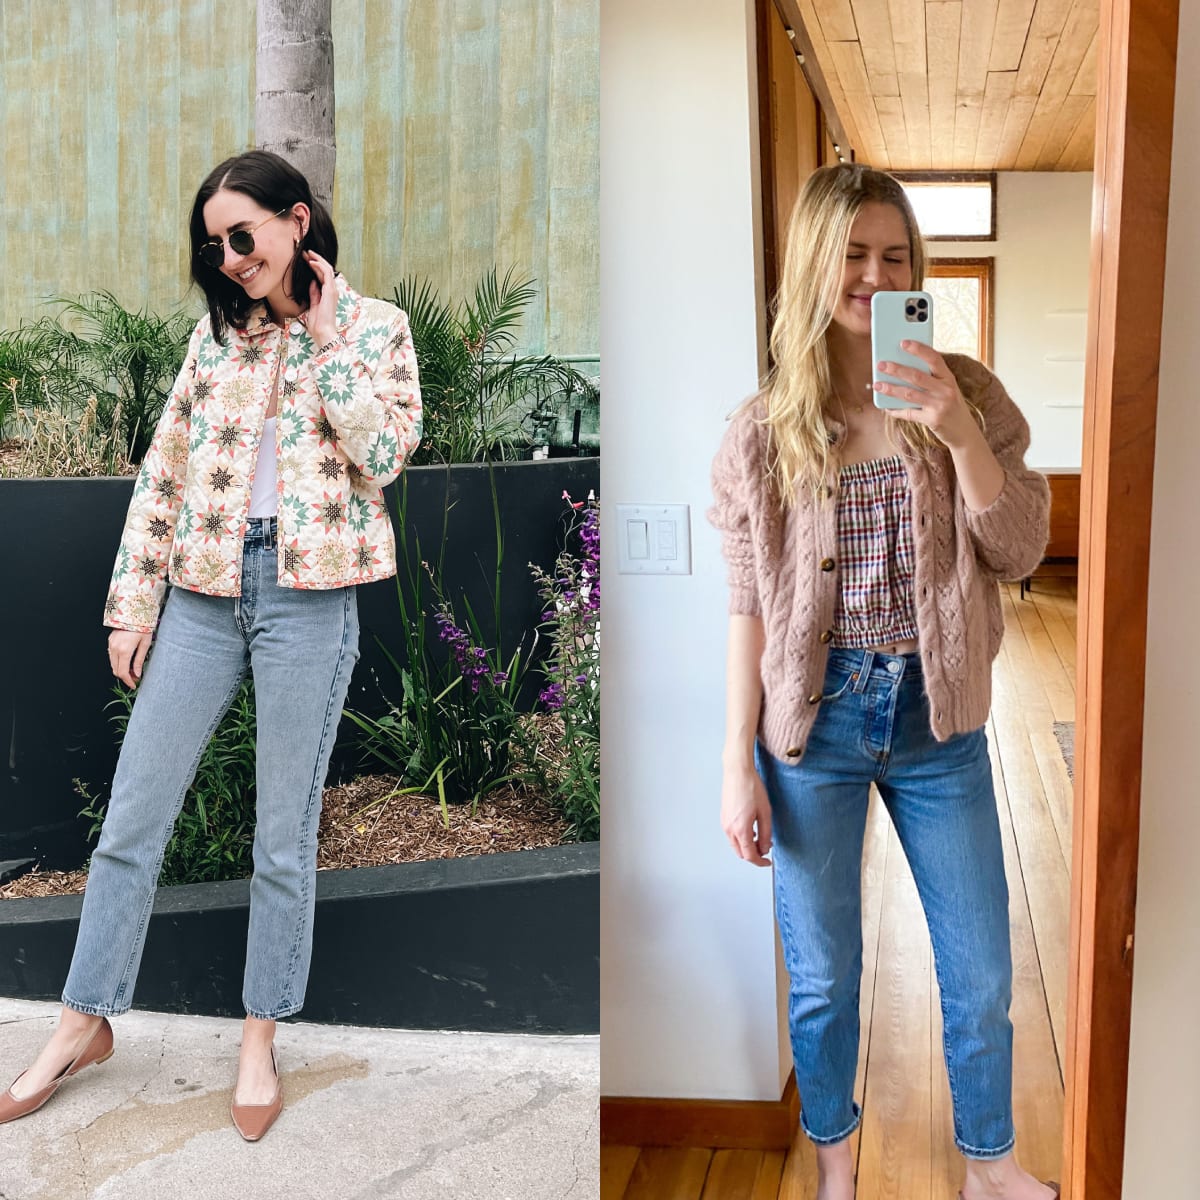 My Favorite Outfits I Wore Recently - Cupcakes & Cashmere